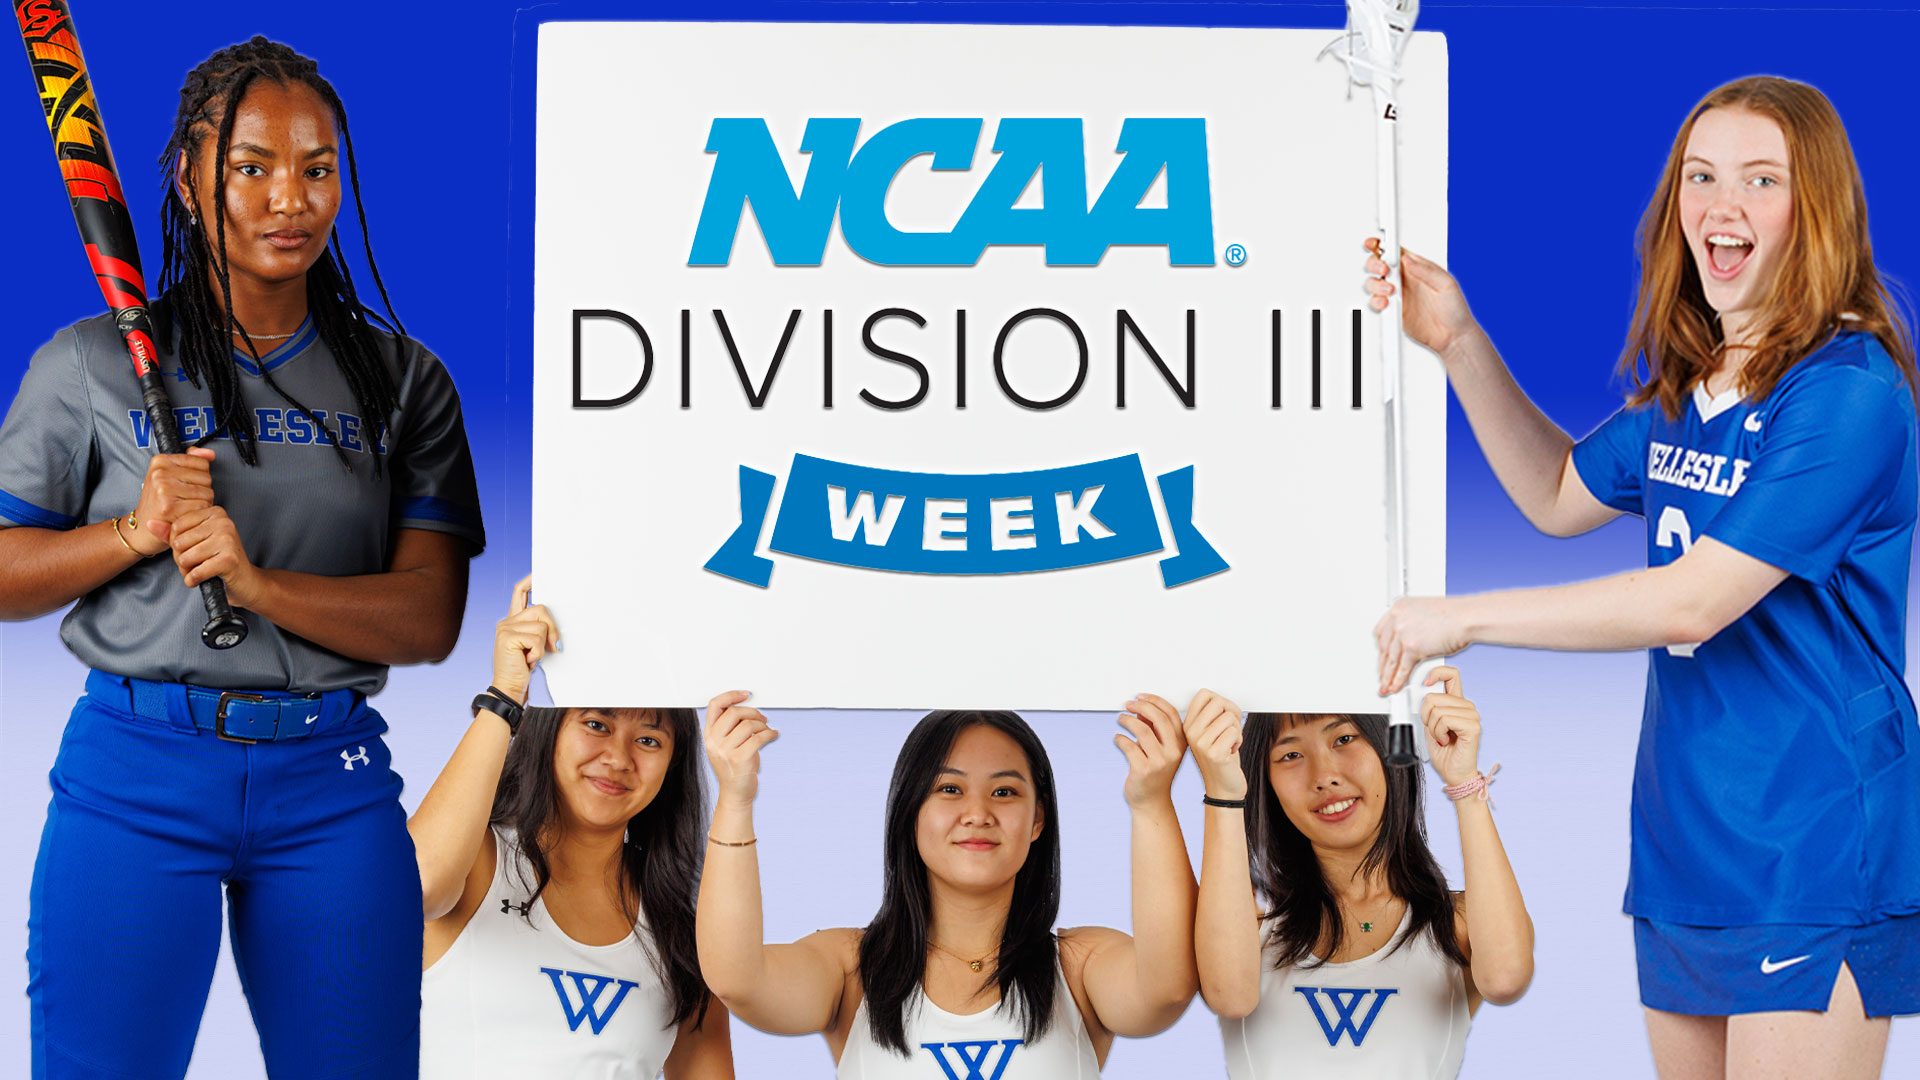 Wellesley Athletics will celebrate NCAA Division III week from April 1-7